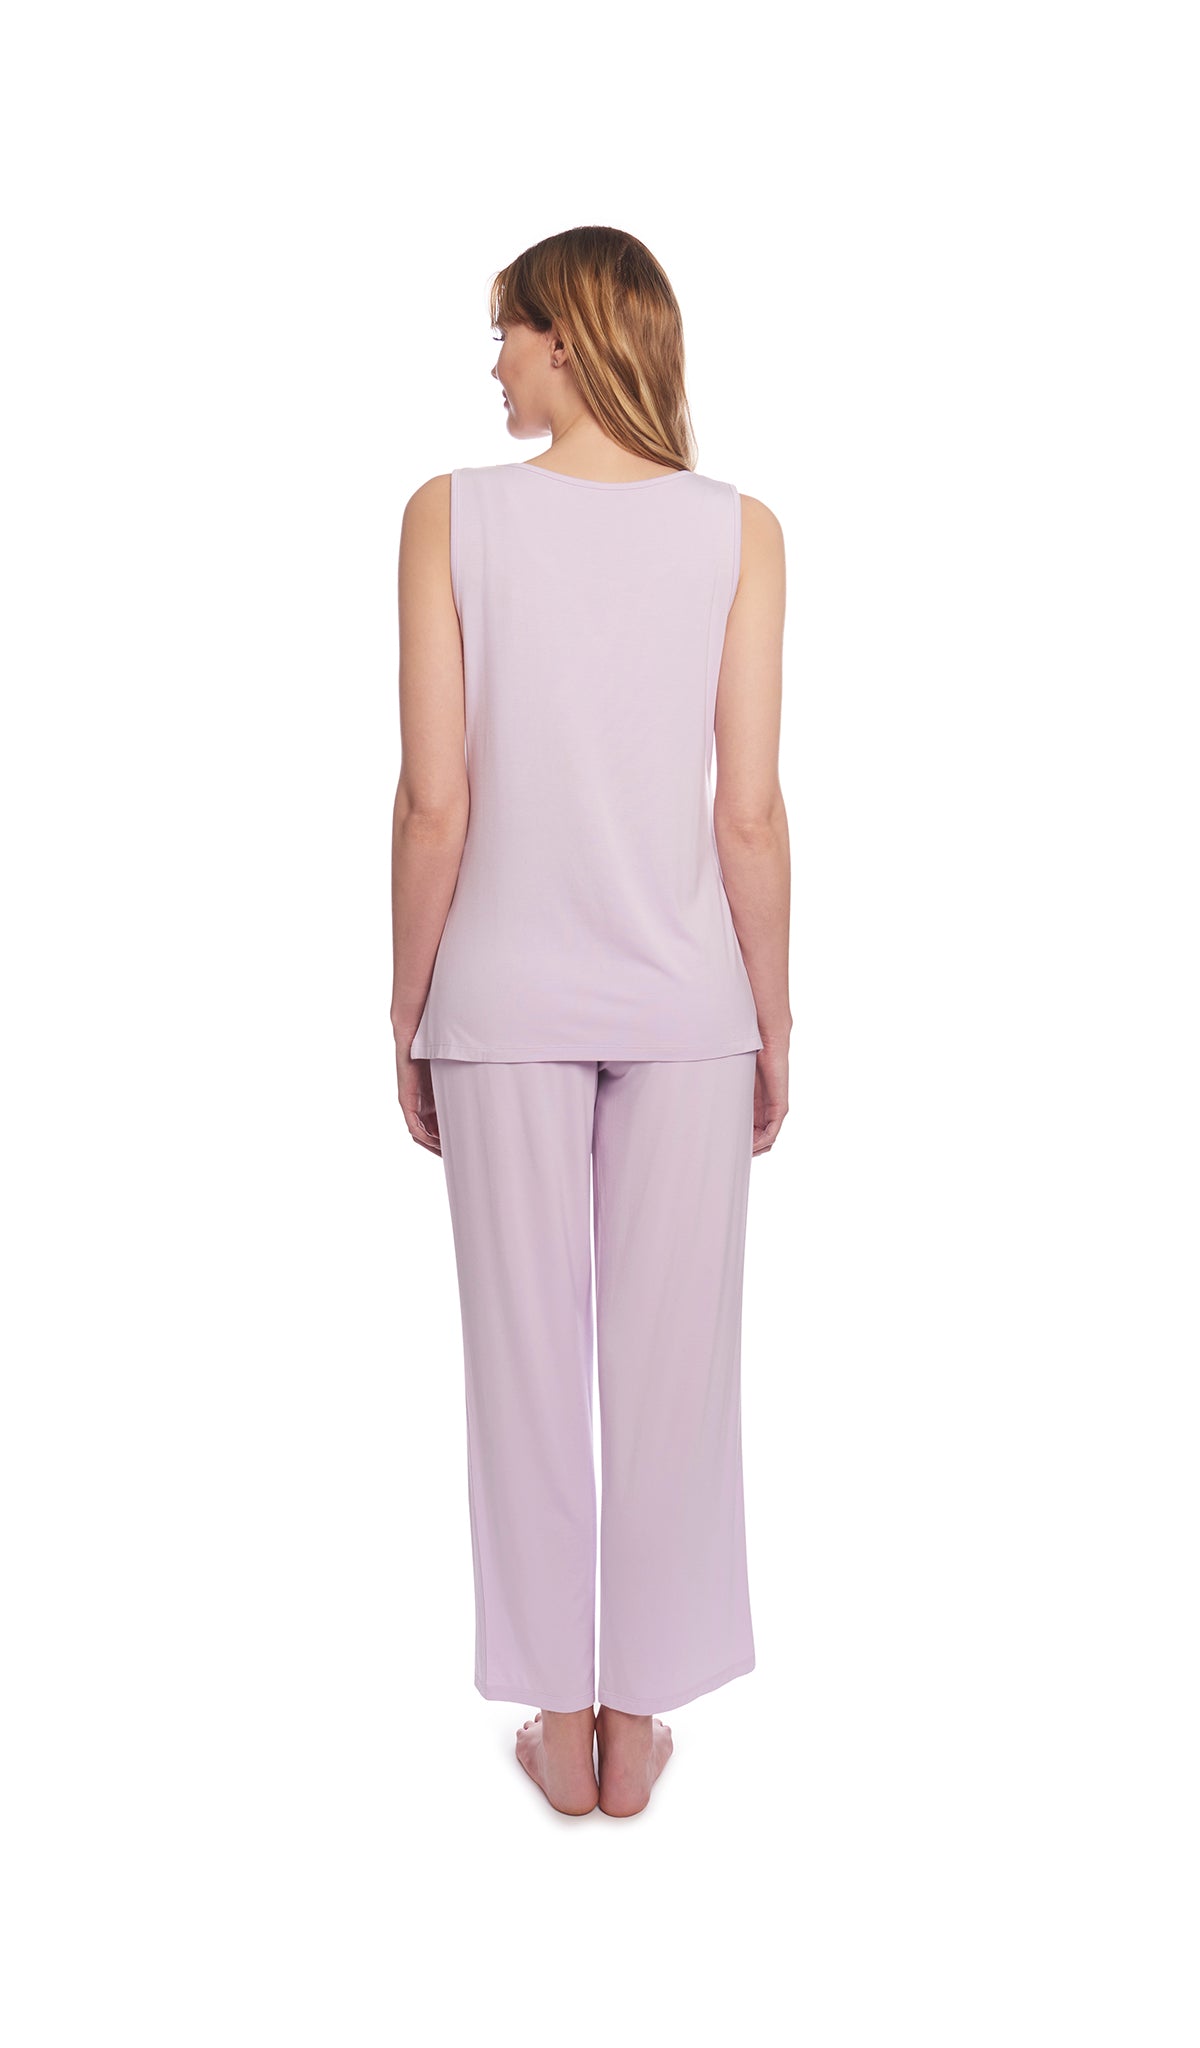 Lavender Analise 3-Piece Set, back shot of woman wearing tank top and pant.